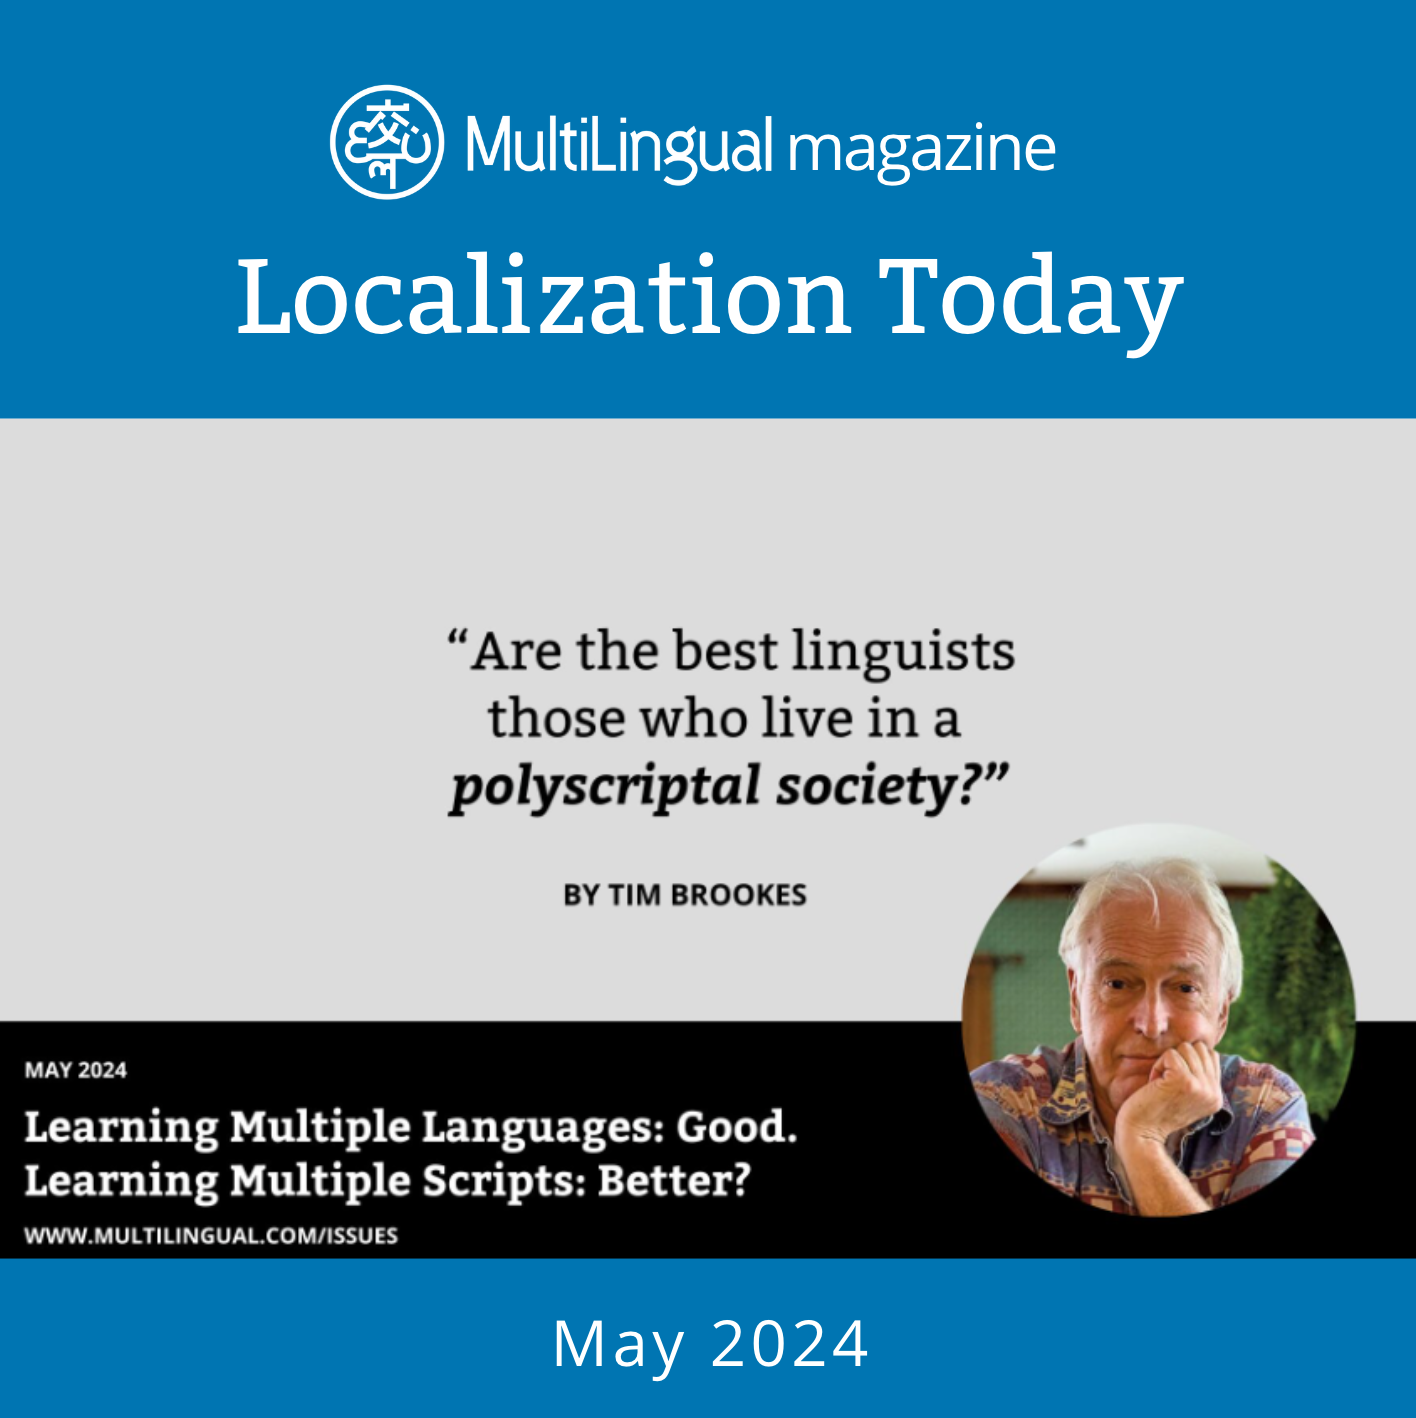 Learning More Than One Language: Good. Learning More Than One Script: Better?